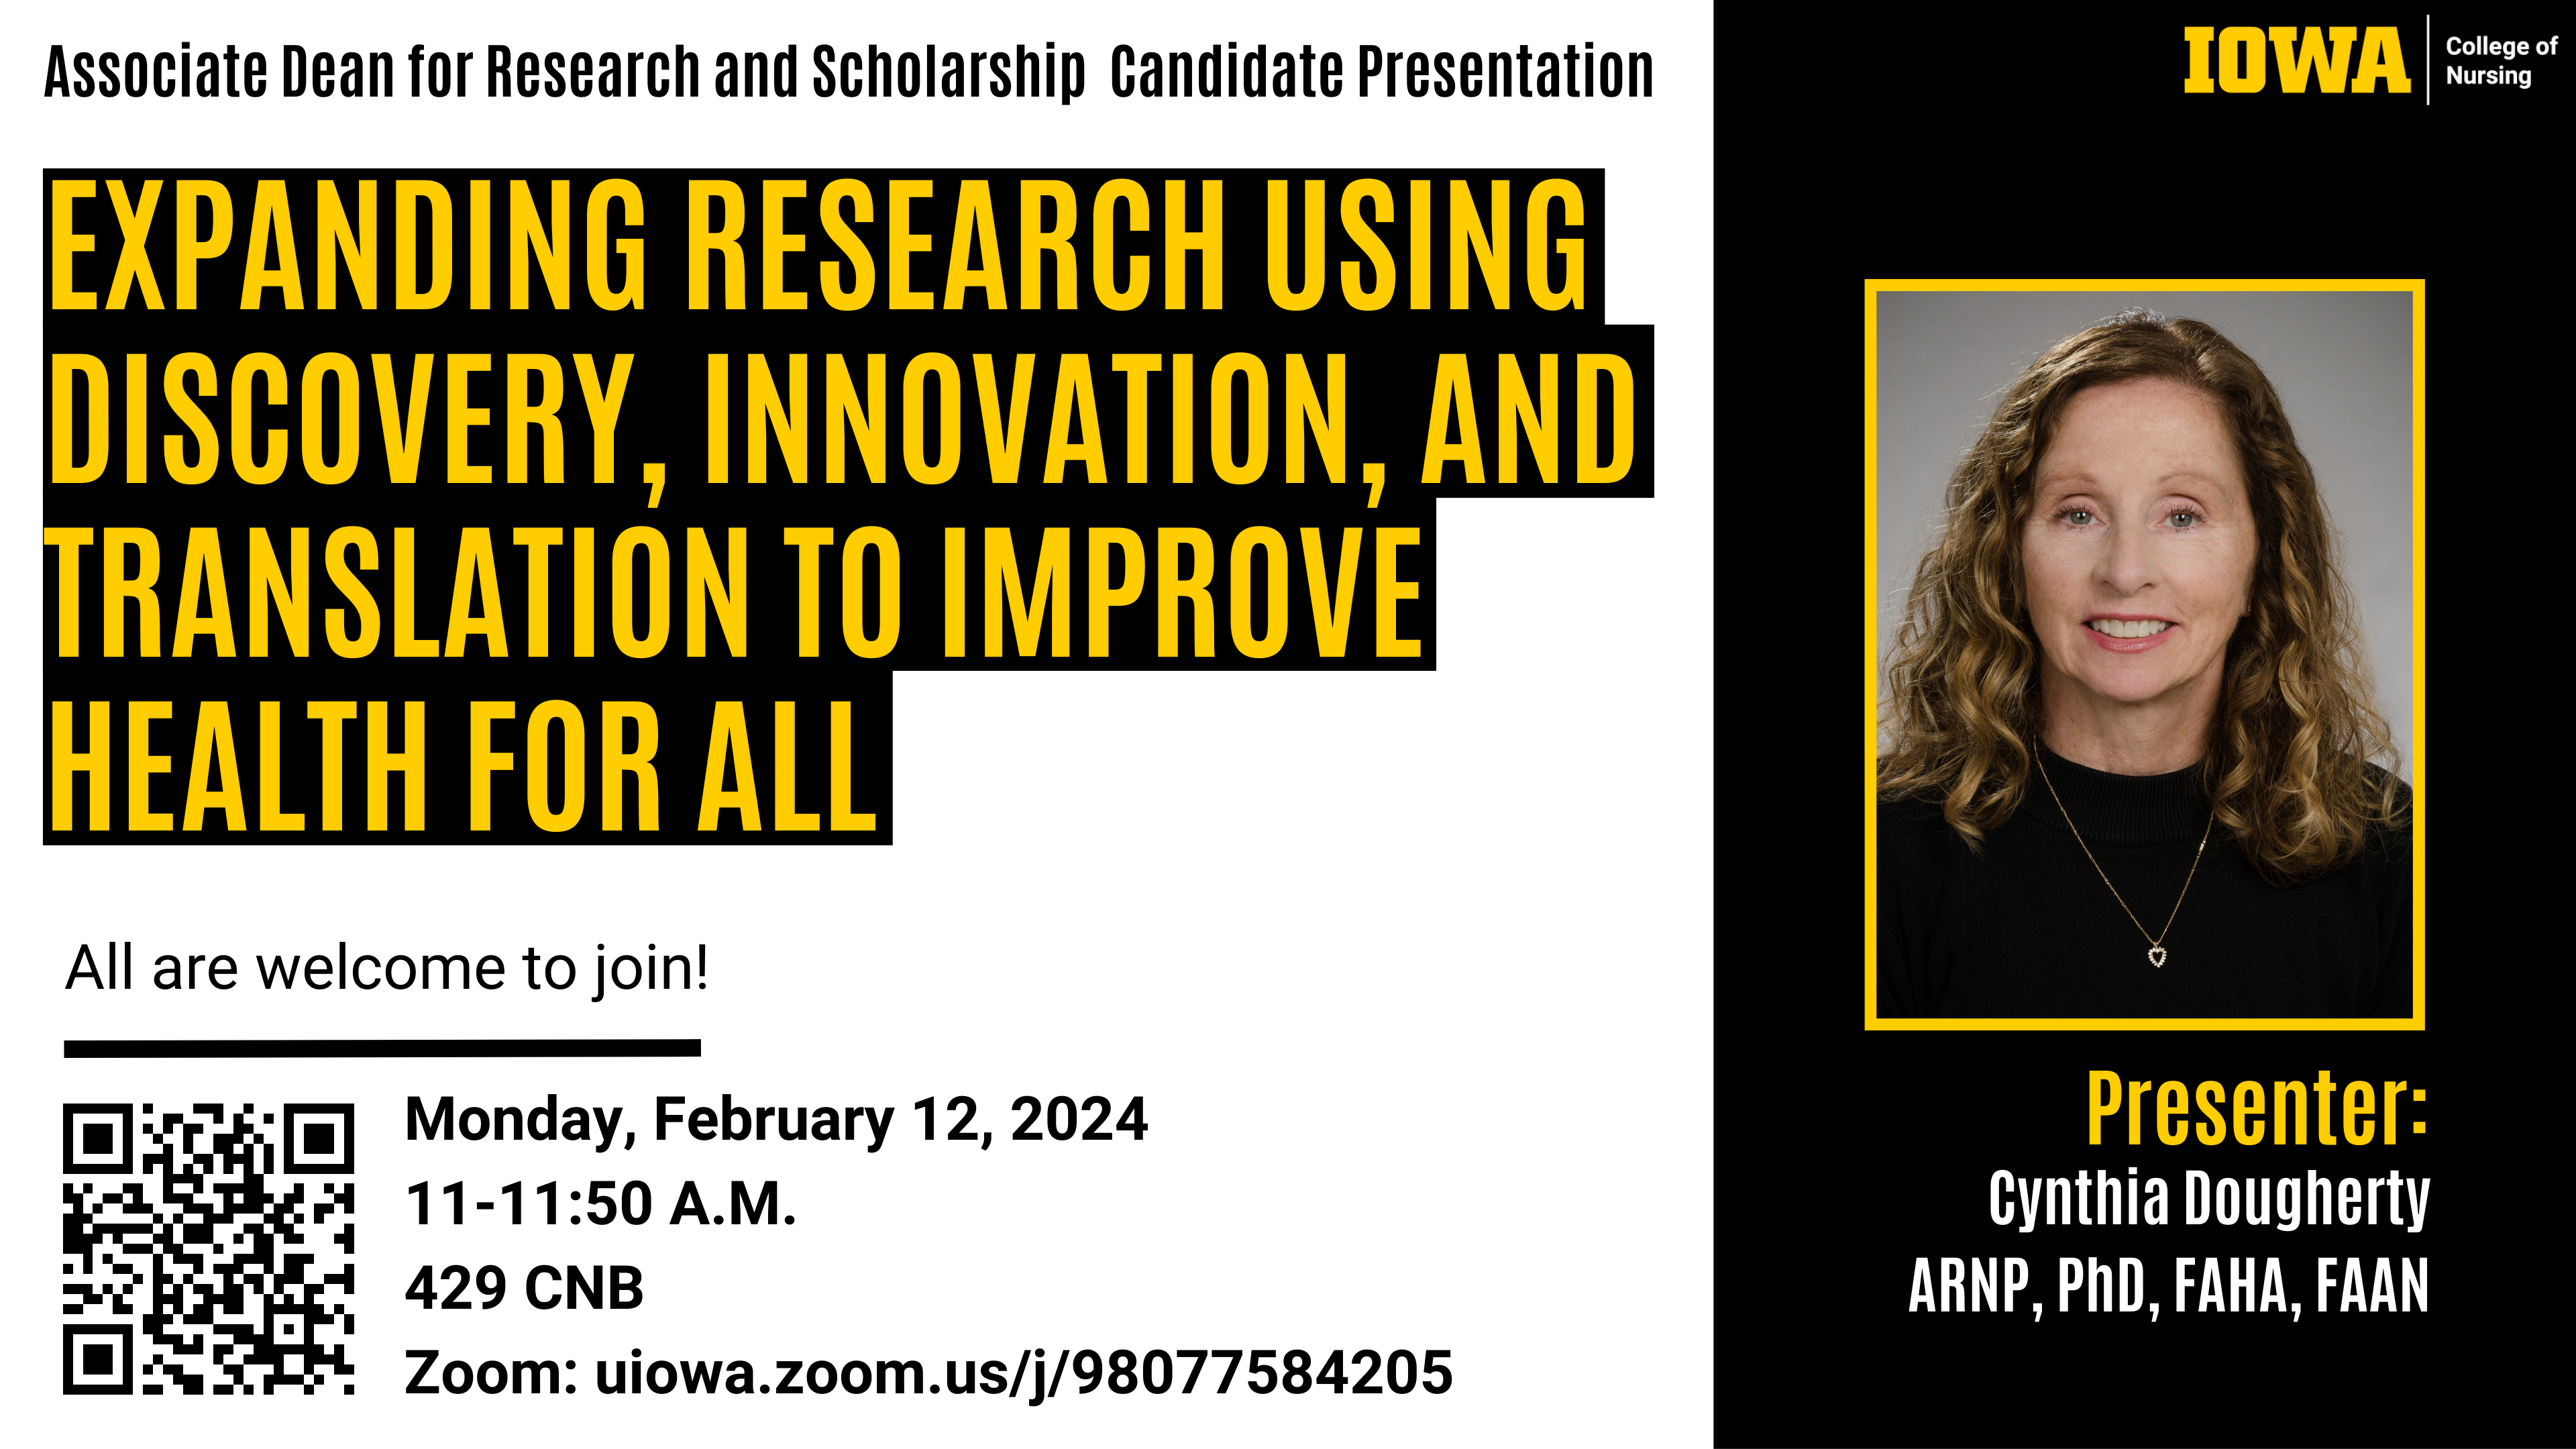 Assoc. Dean for Research and Scholarship presentation - Cynthia Dougherty, February 12, 11 am